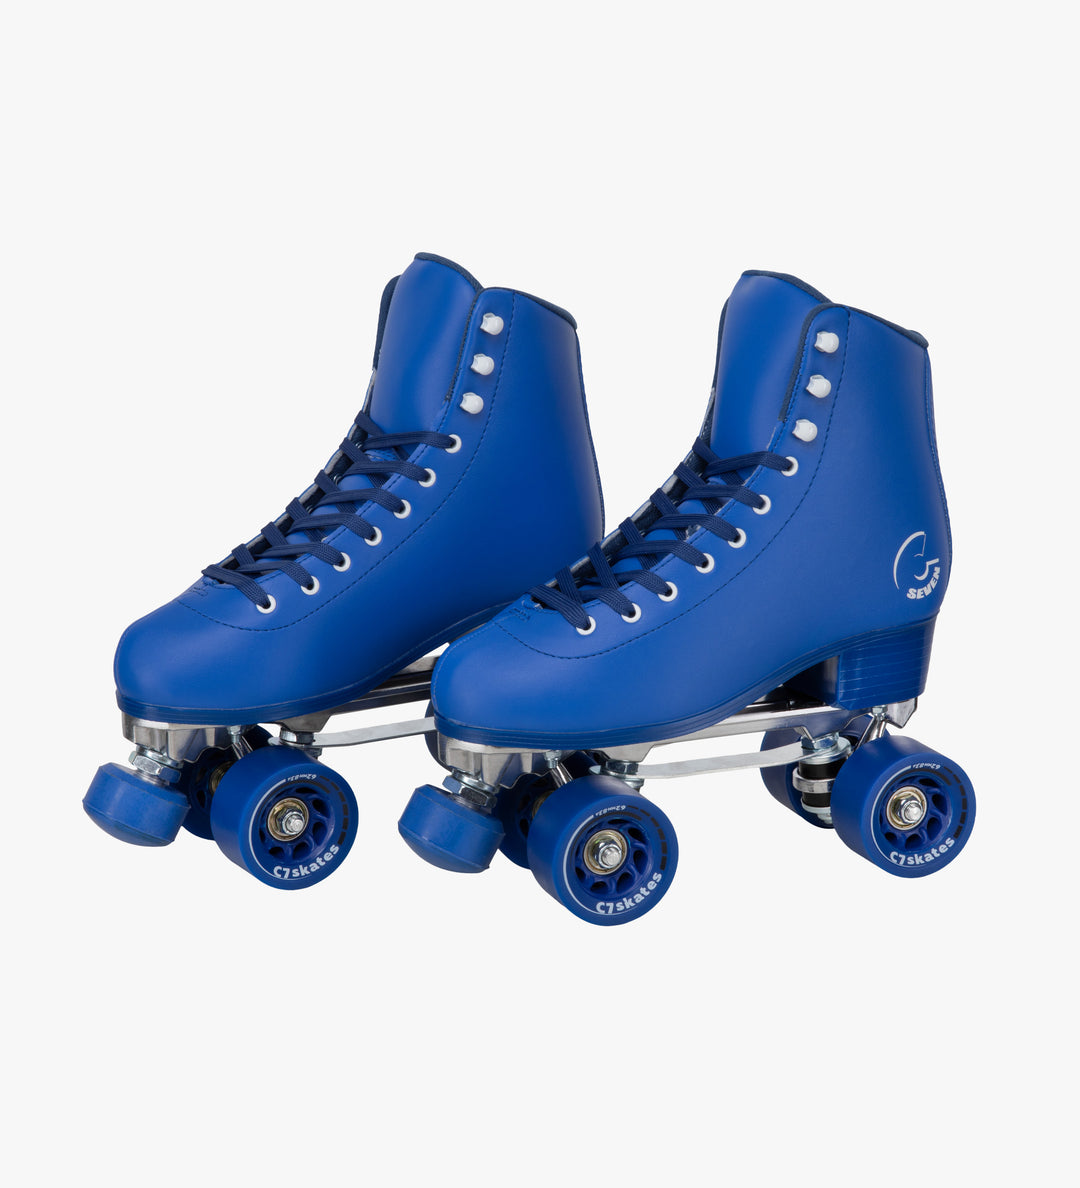 The deep blue Midsummer’s Eve Quad Skates feature removable toe stops, 62mm 83A wheels and a structured boot. 